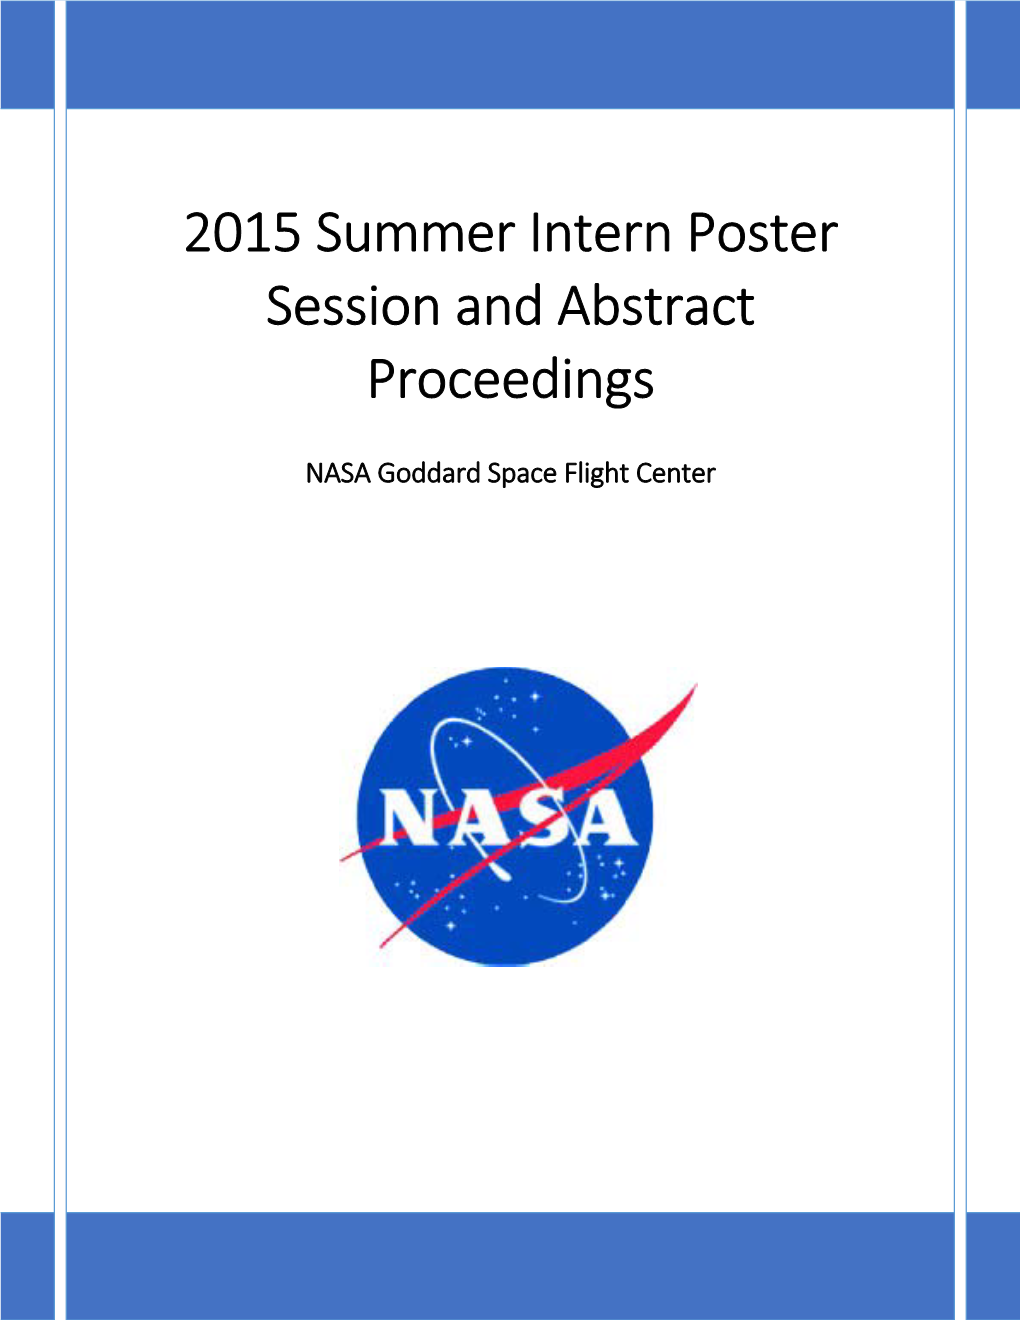 2015 Summer Intern Poster Session and Abstract Proceedings